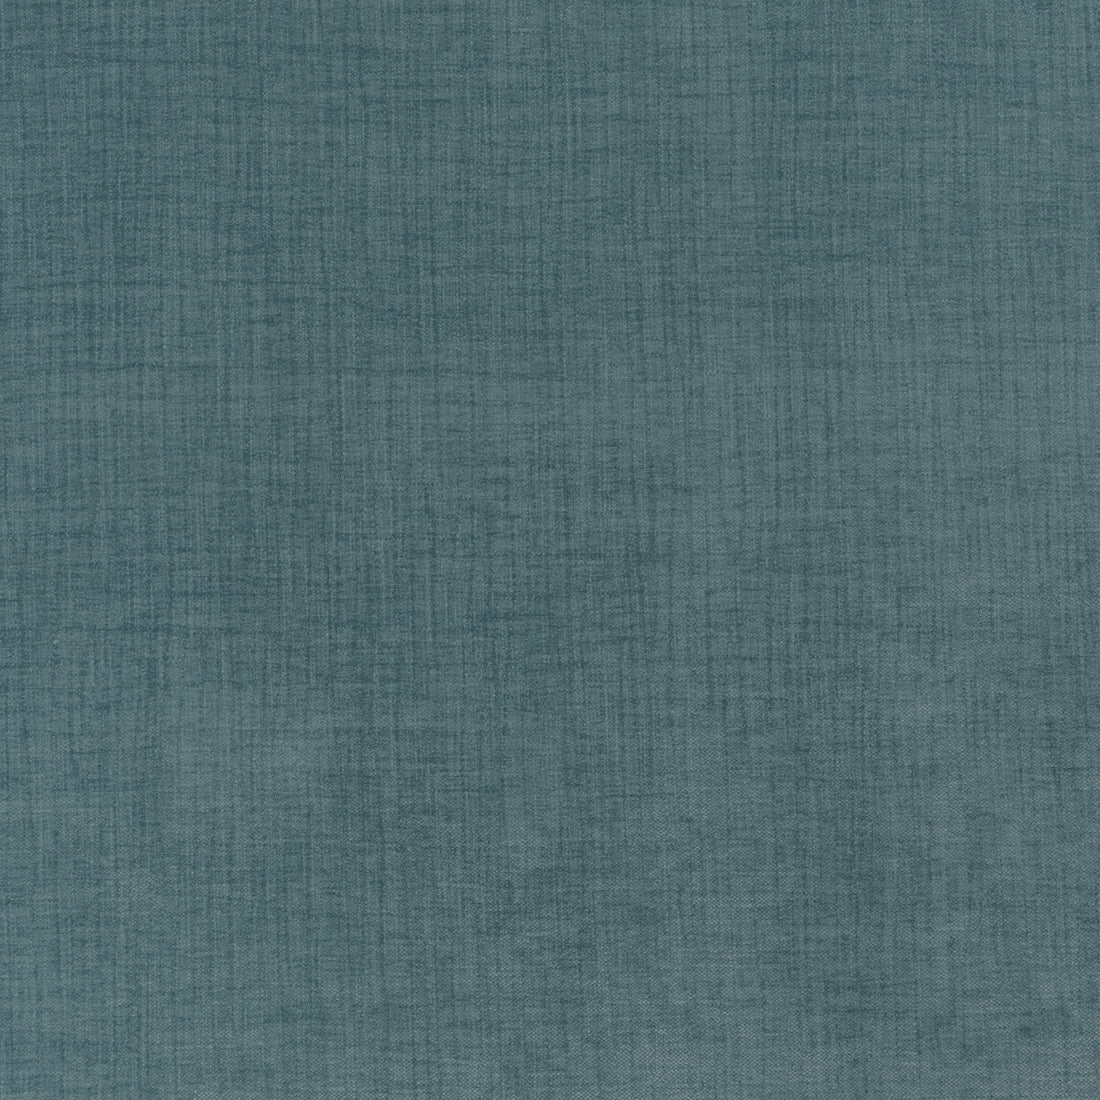 Accommodate fabric in glacier color - pattern 36255.15.0 - by Kravet Contract in the Supreen collection